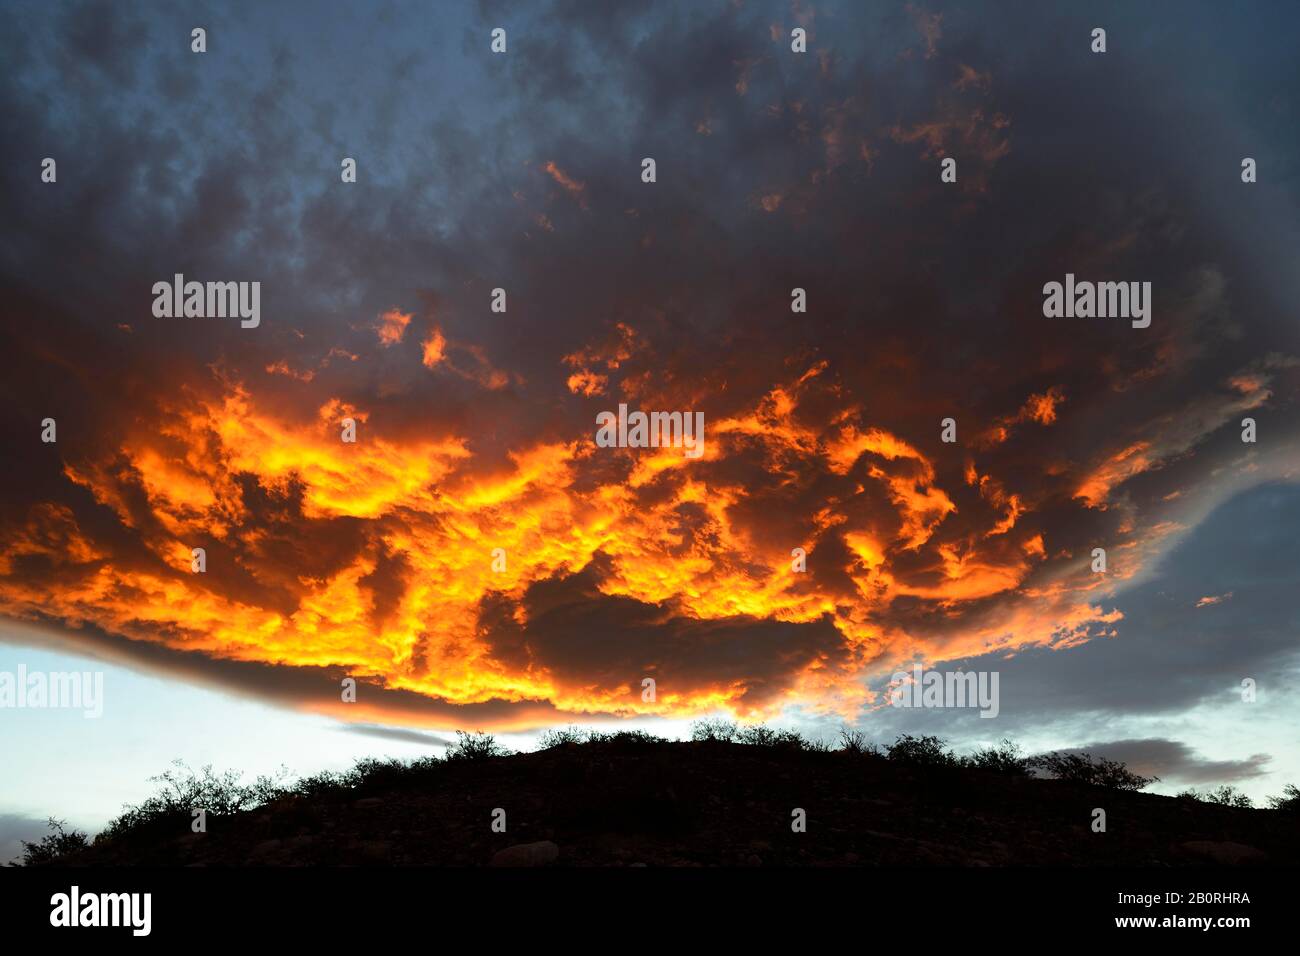 Burning clouds at sunset, near Chos Malal, Neuquen province, Patagonia, Argentina Stock Photo